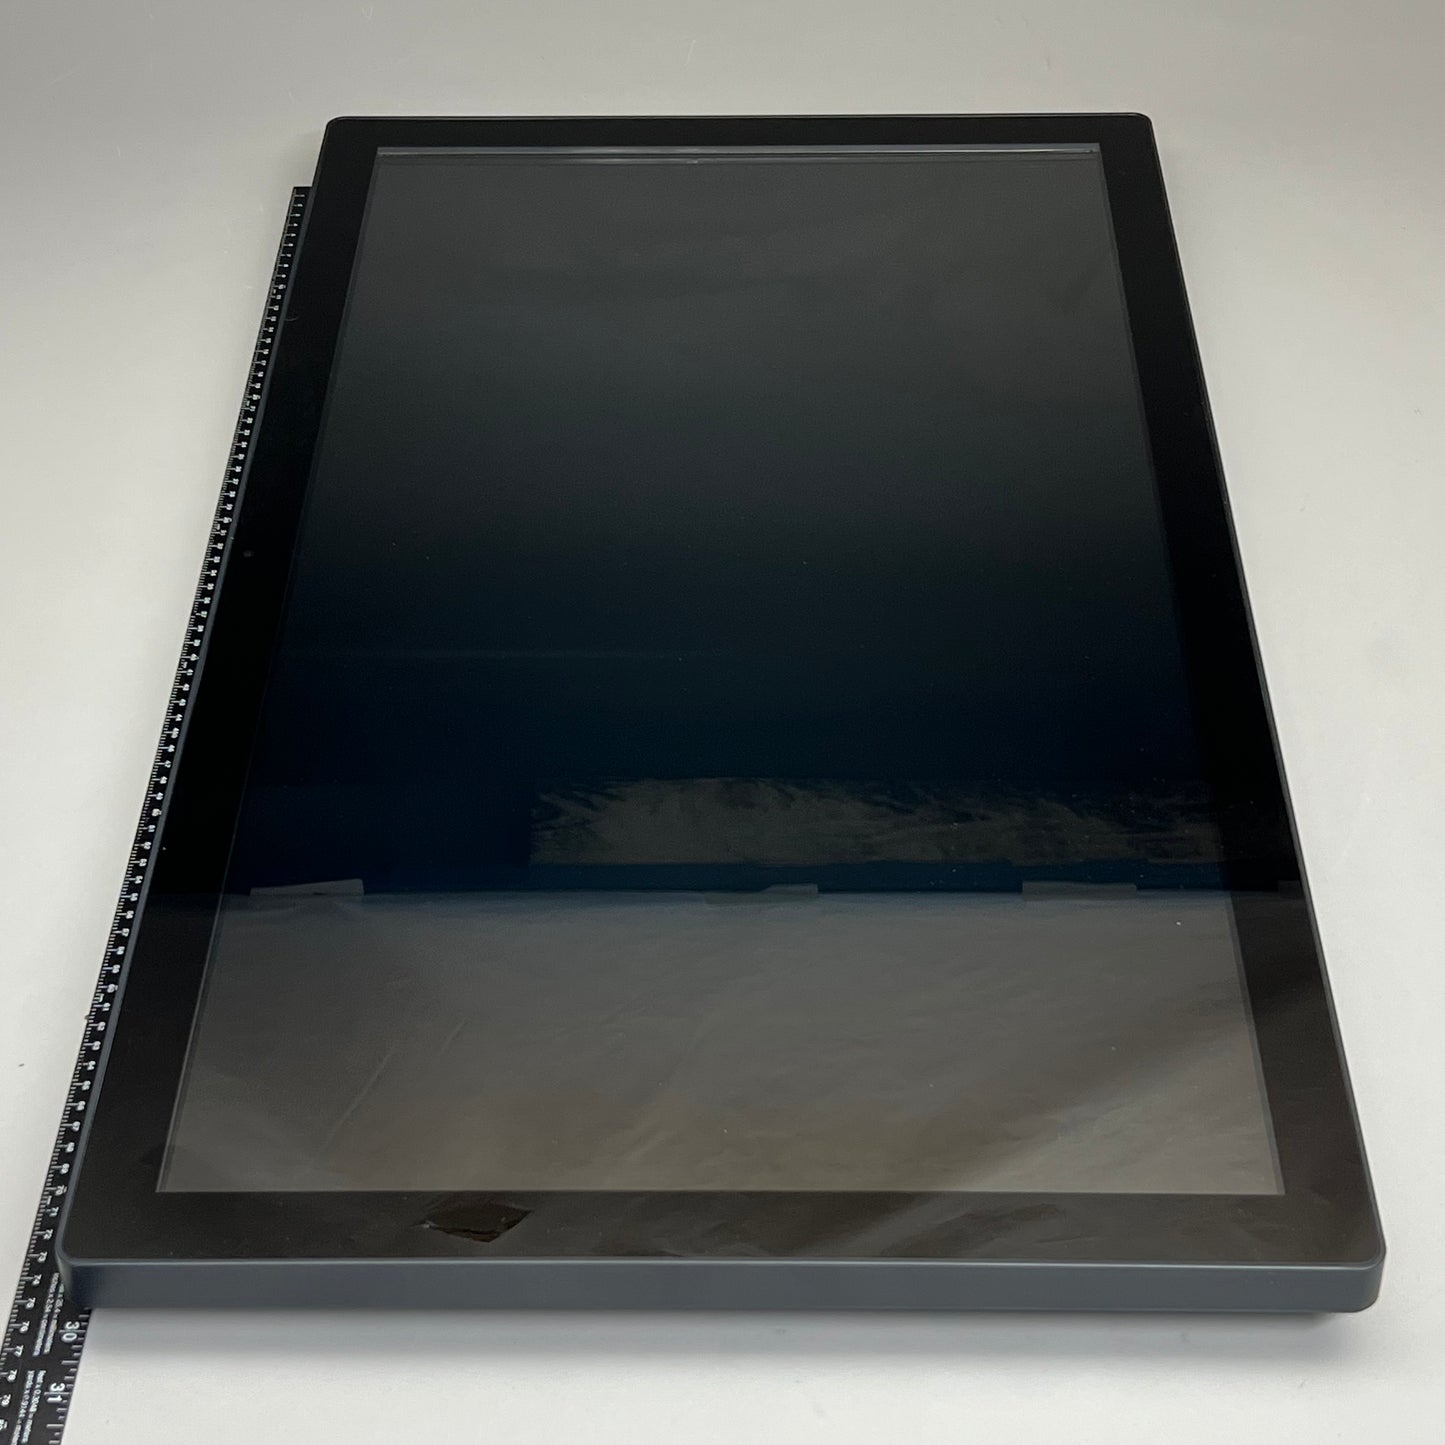 ECHELON Replacement Exercise Tablet 32" ECHKIN320-3288 (New)